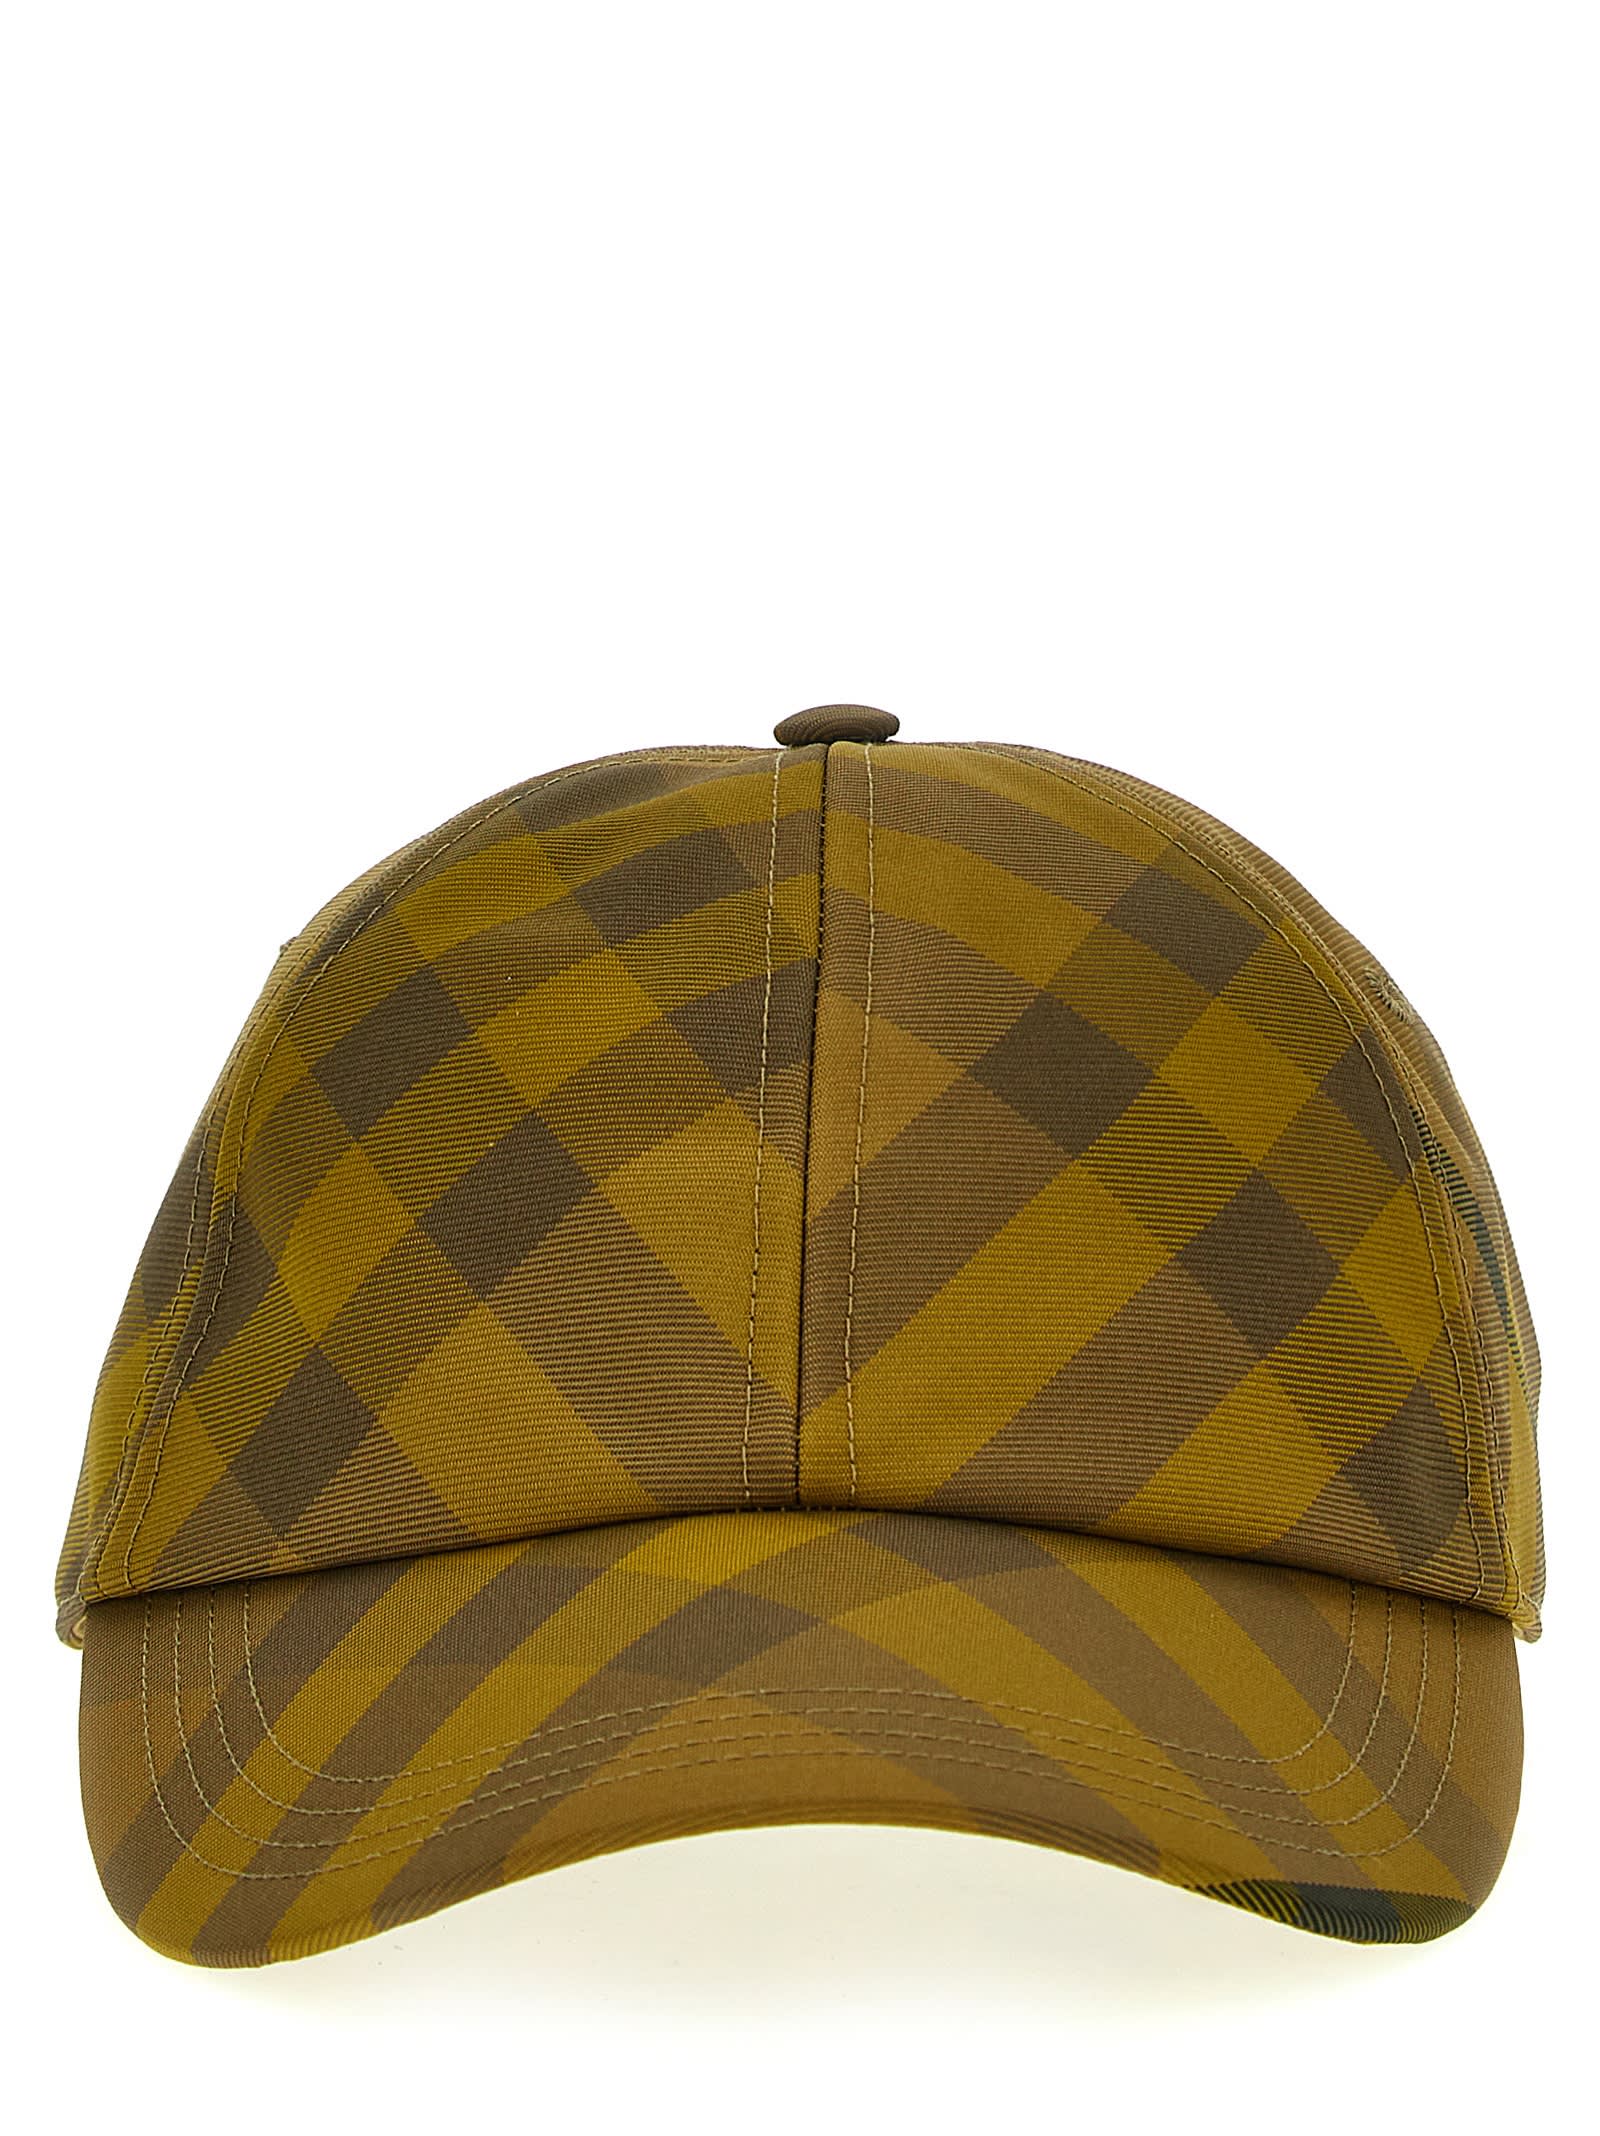 Burberry Check Cap In Yellow